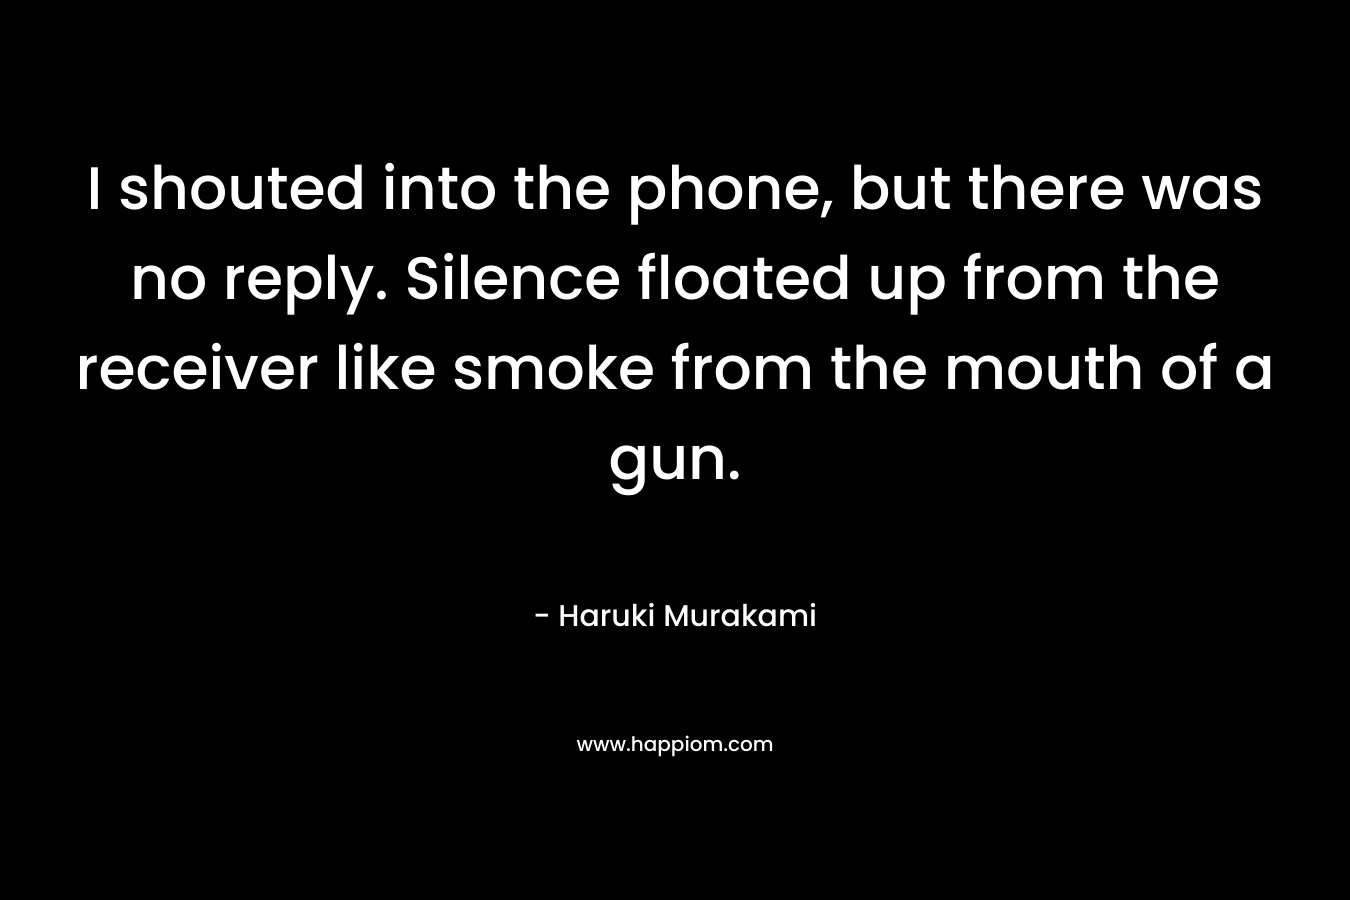 I shouted into the phone, but there was no reply. Silence floated up from the receiver like smoke from the mouth of a gun. – Haruki Murakami